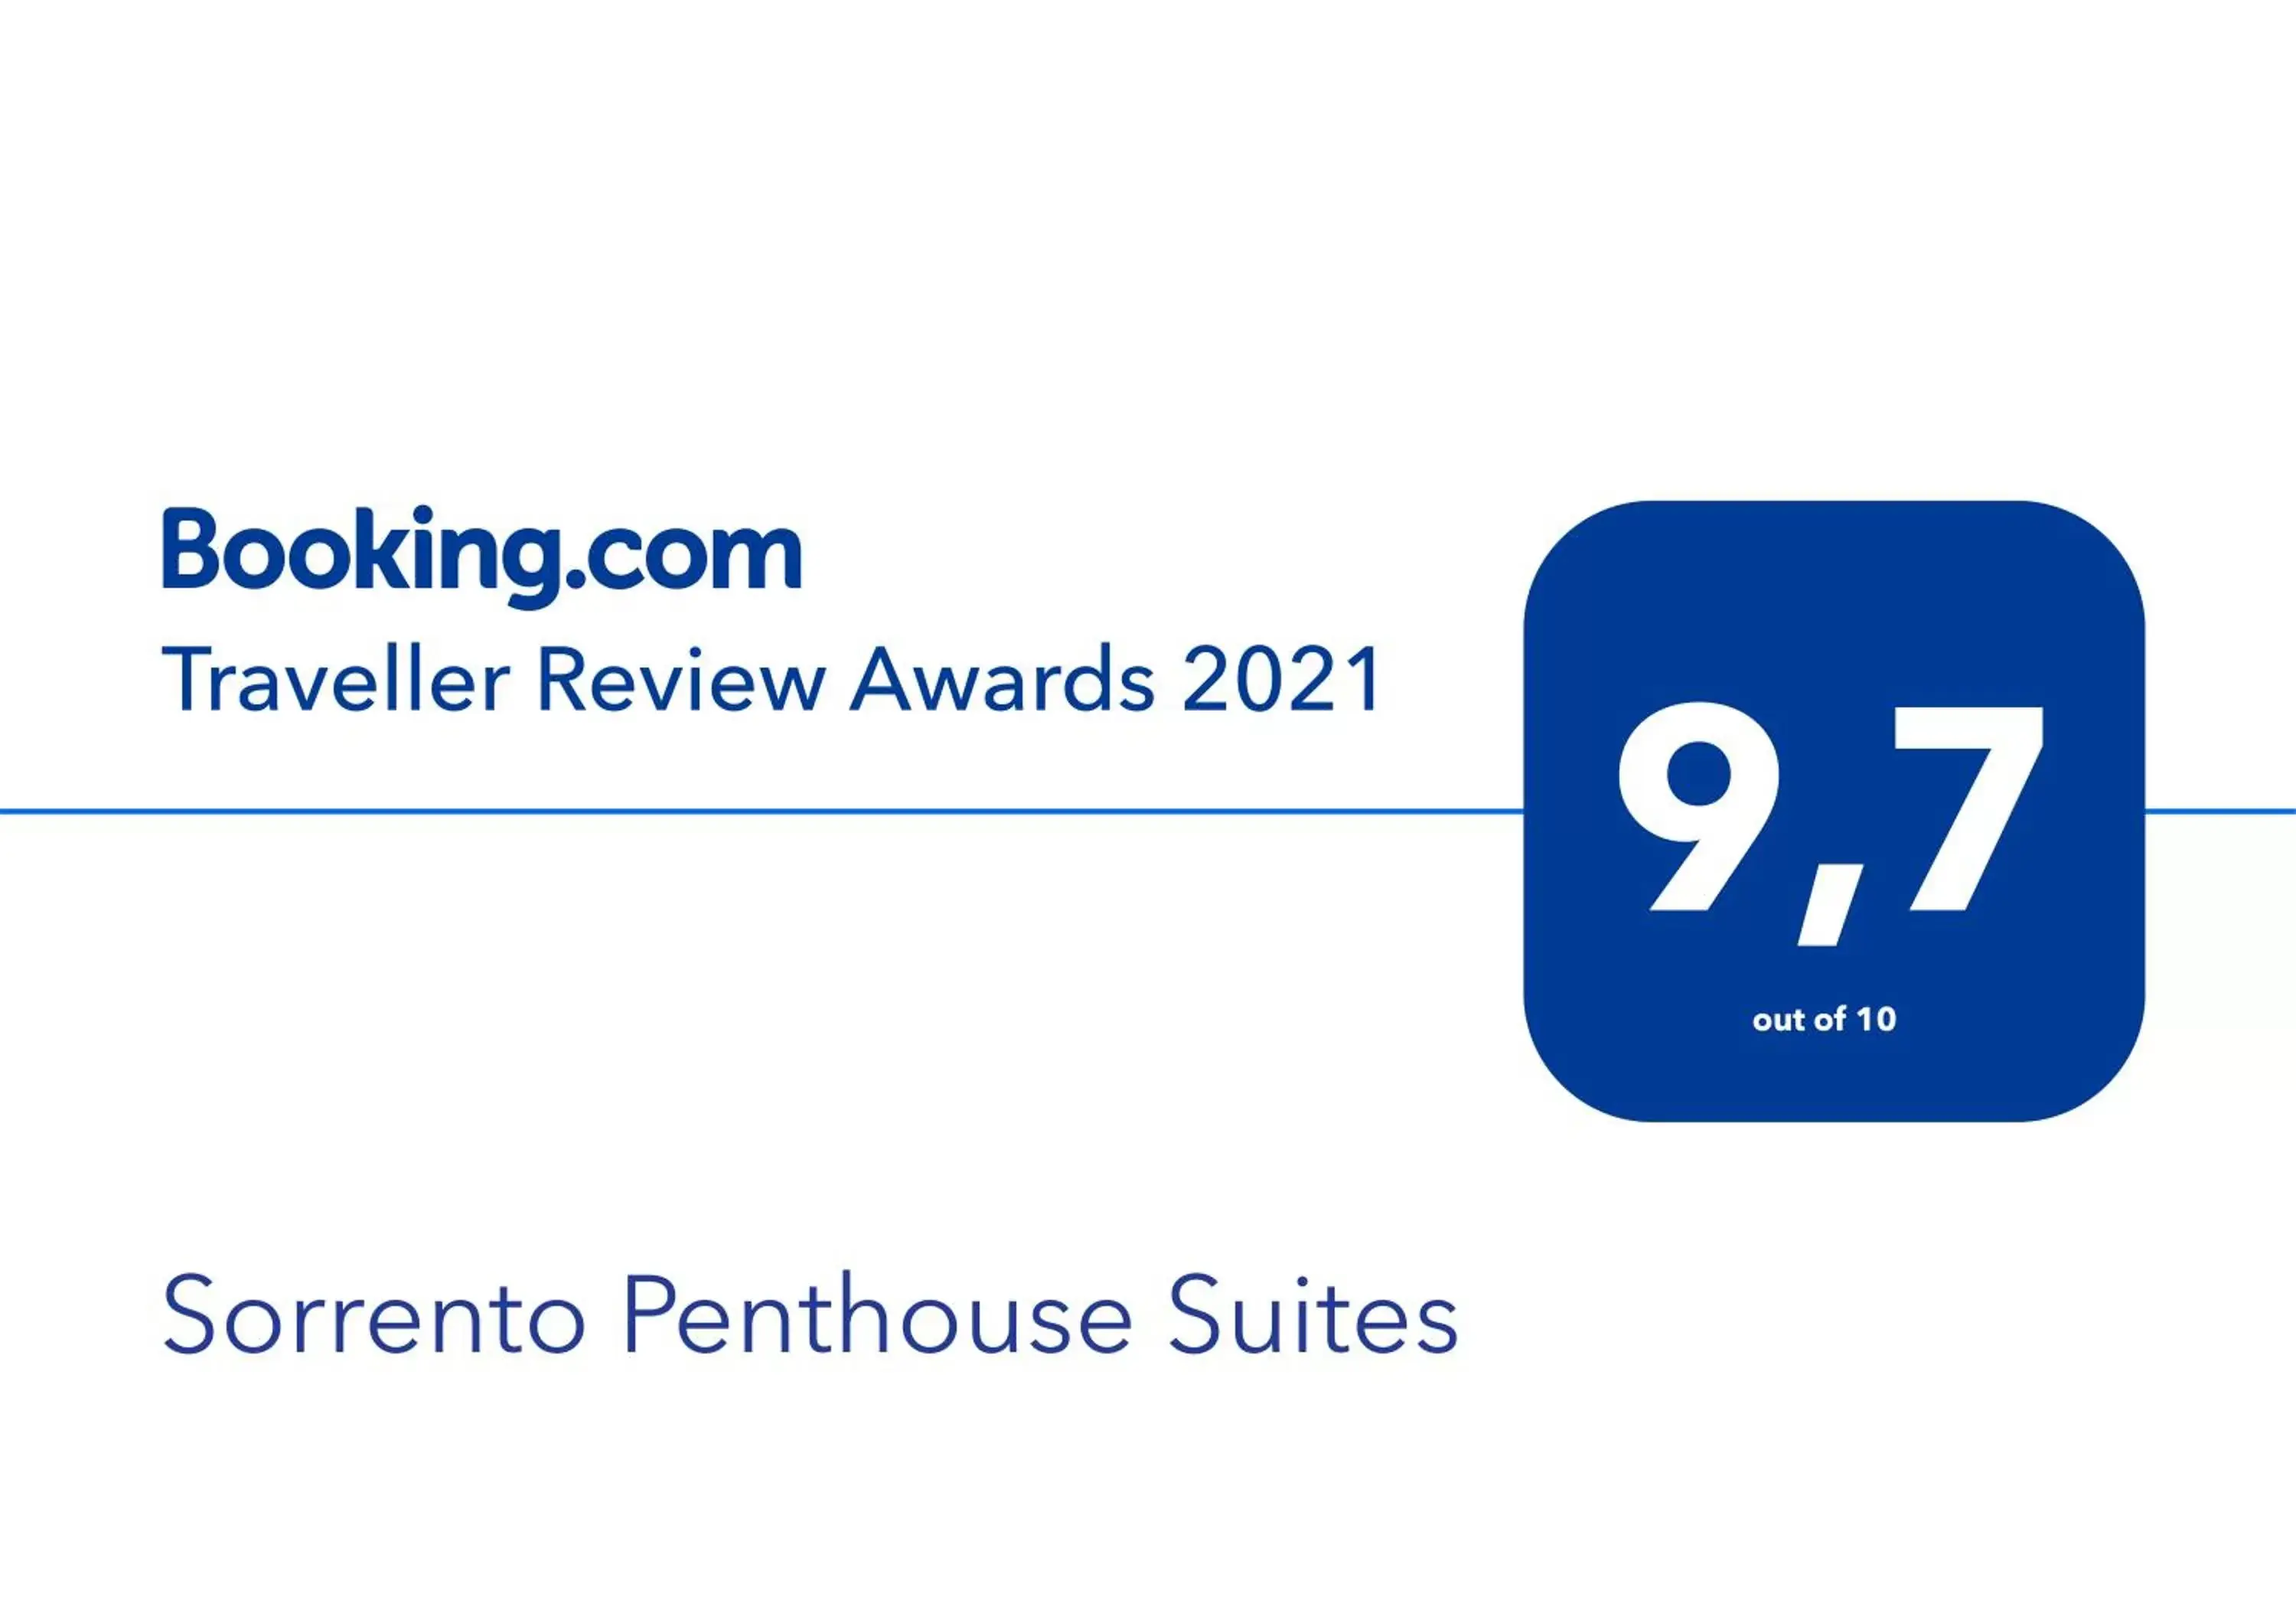 Certificate/Award in Sorrento Penthouse Suites